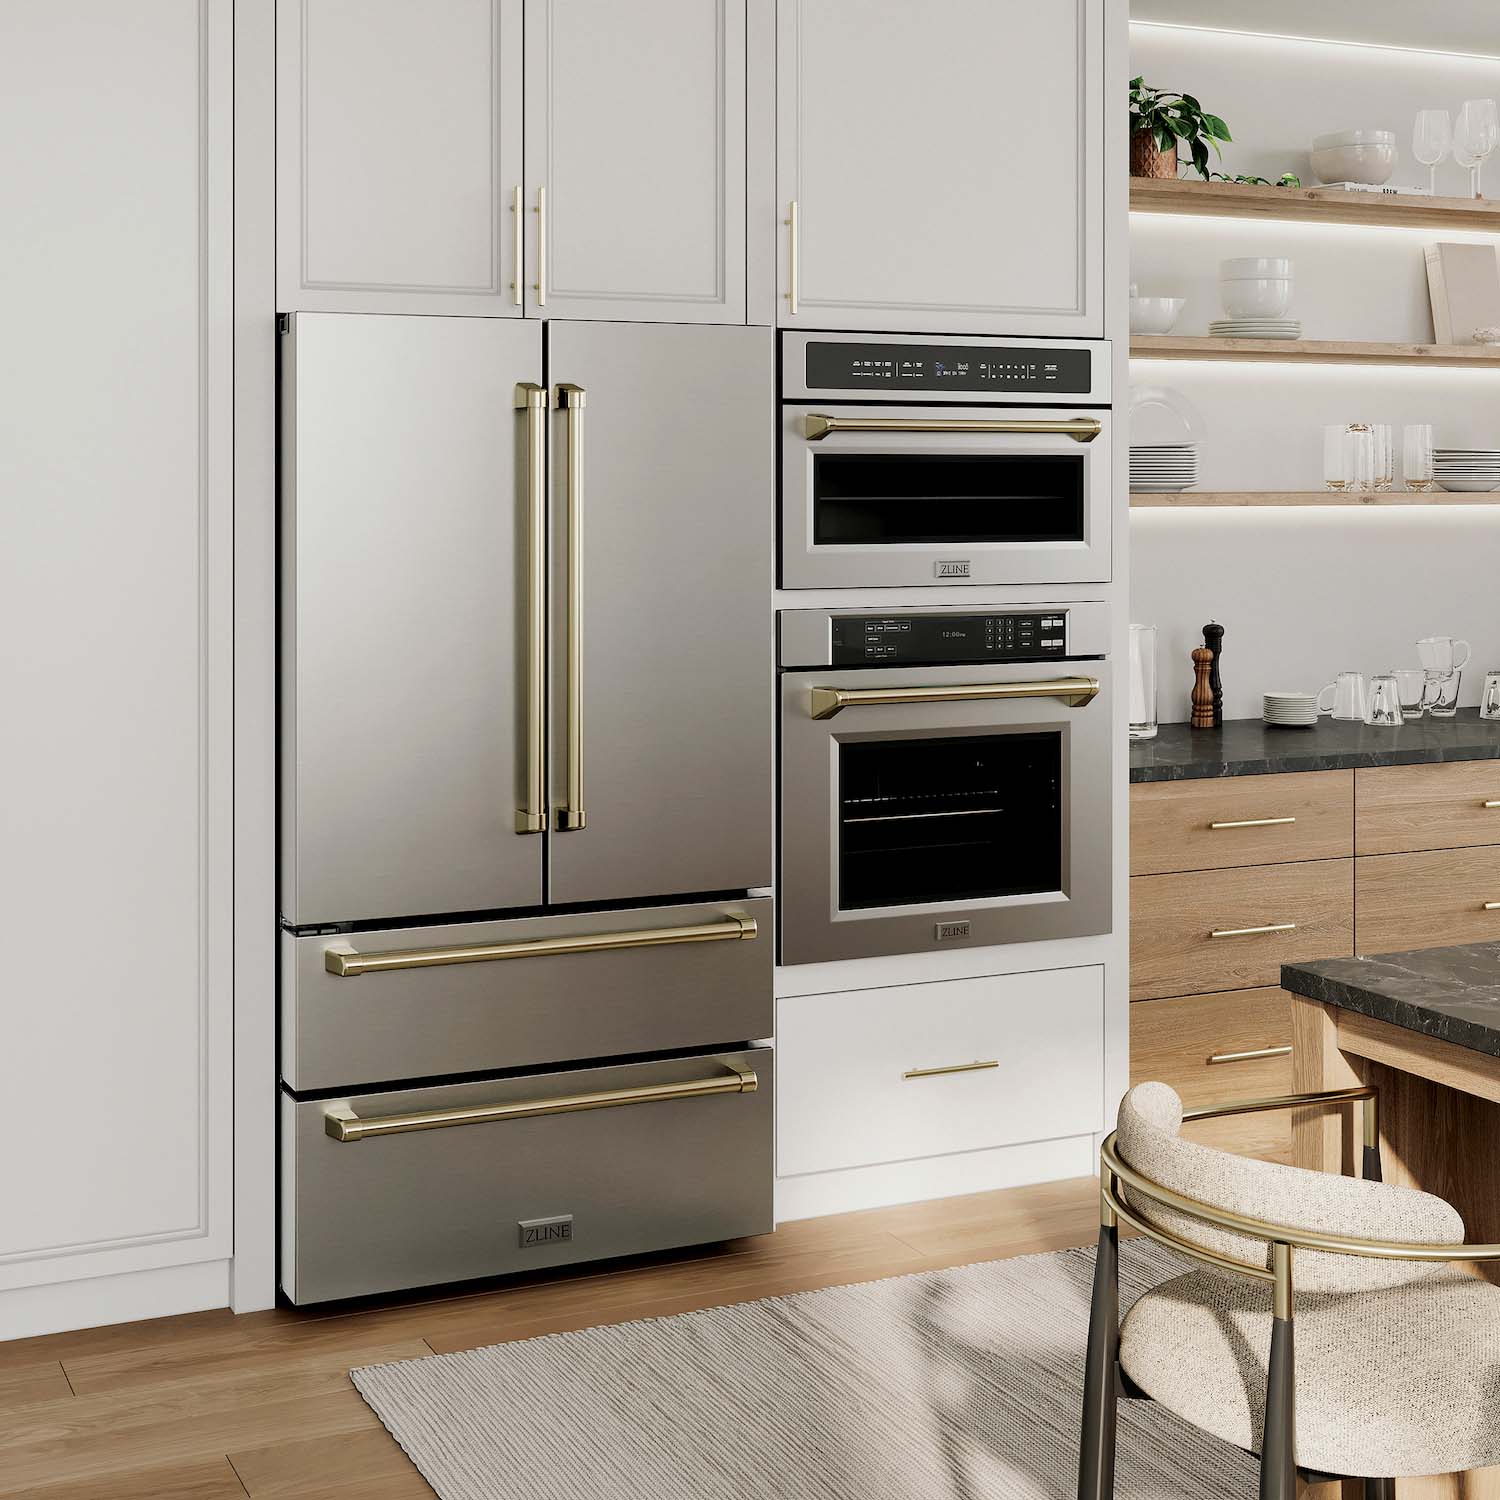 ZLINE Autograph Edition Counter-Depth Refrigerator, Microwave Oven, and Wall Oven in a kitchen with white cabinets and walls.